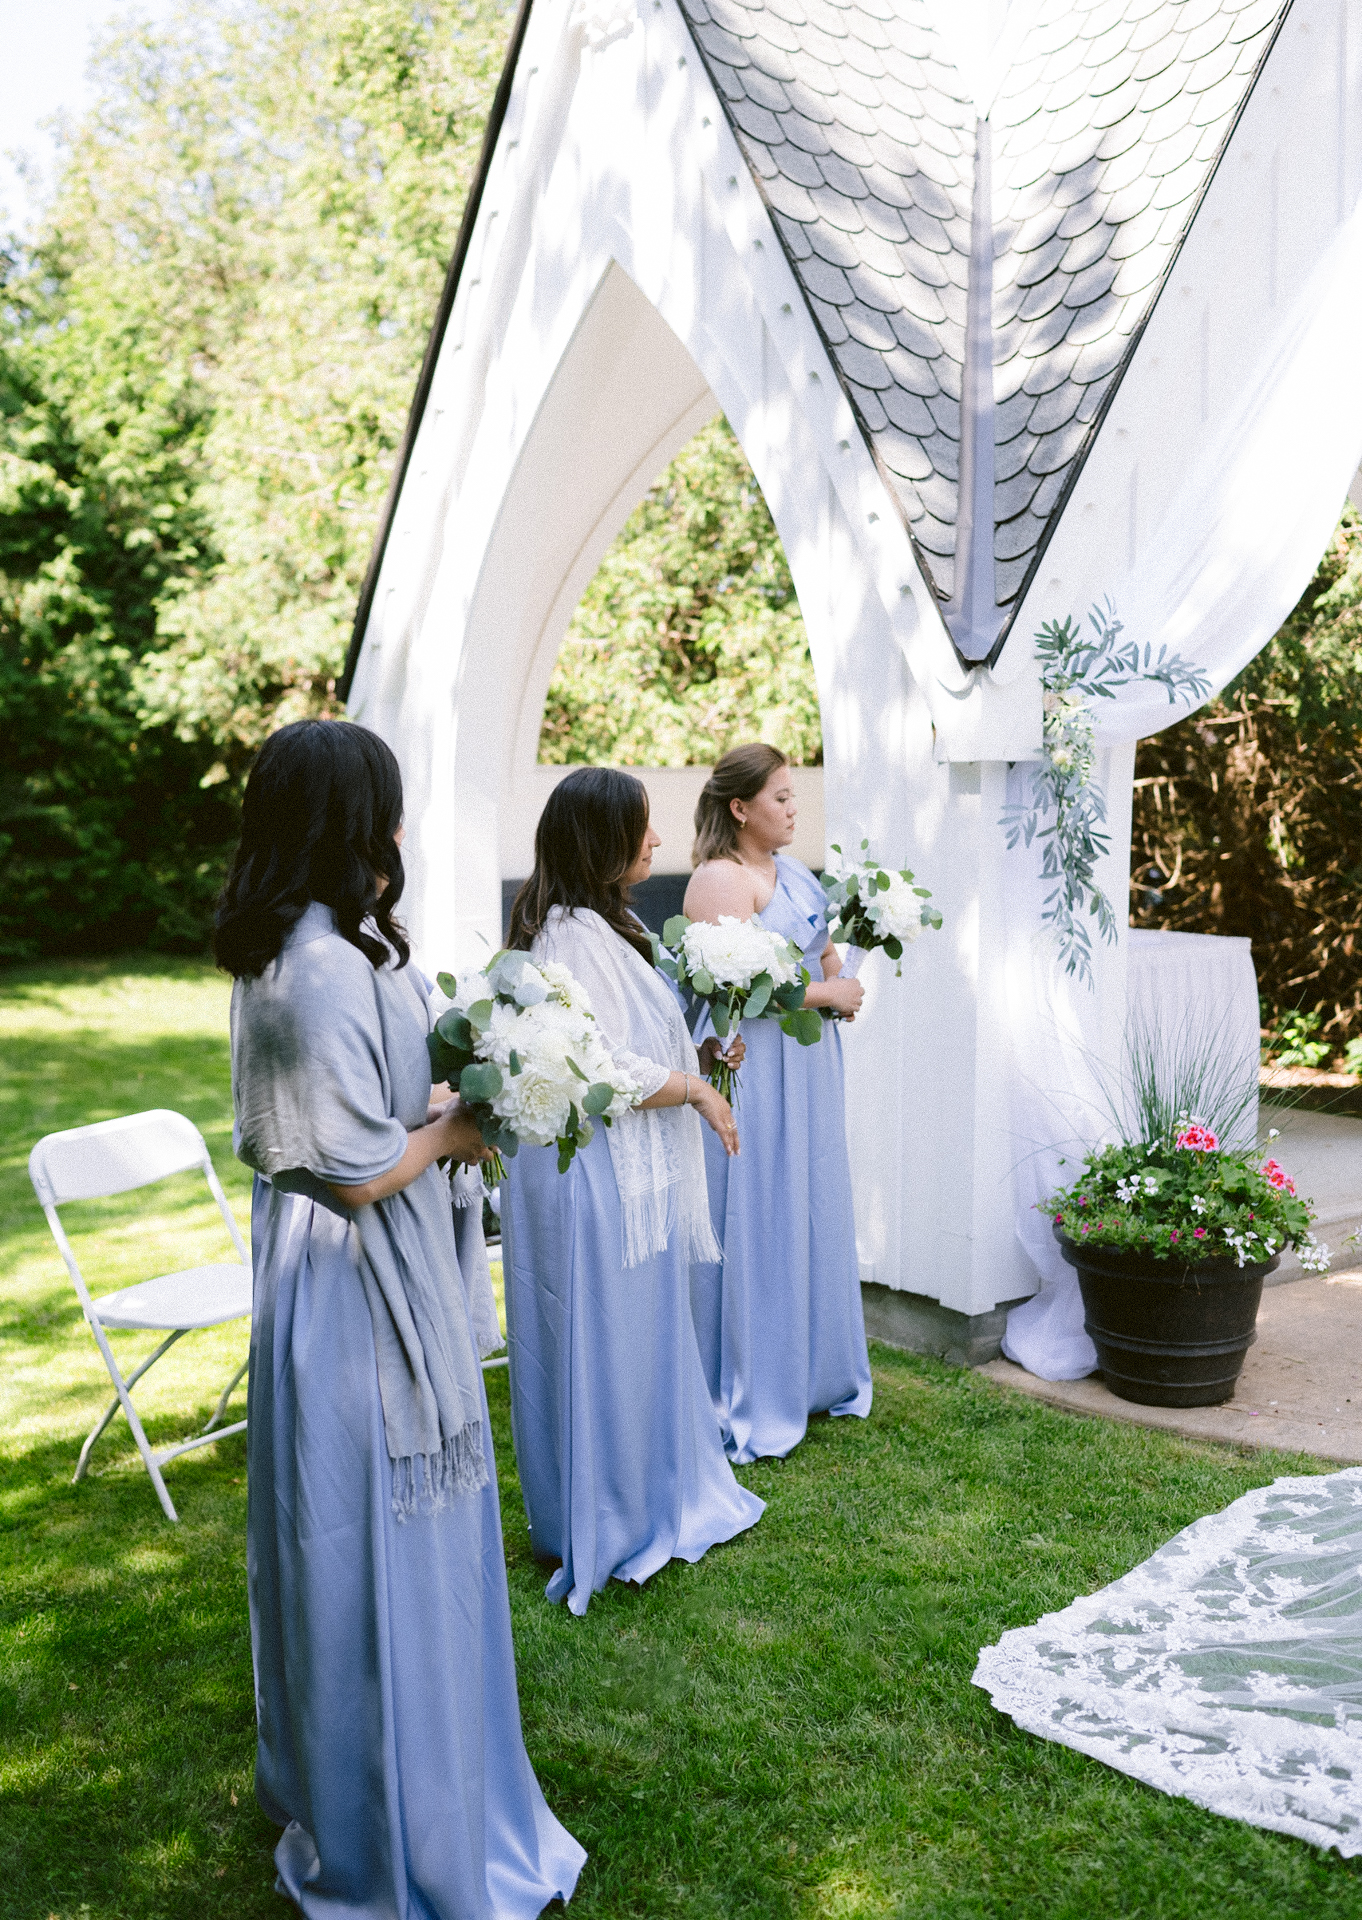 Three bridesmaids in blue dresses standing beside a white archway at an outdoor wedding ceremony.